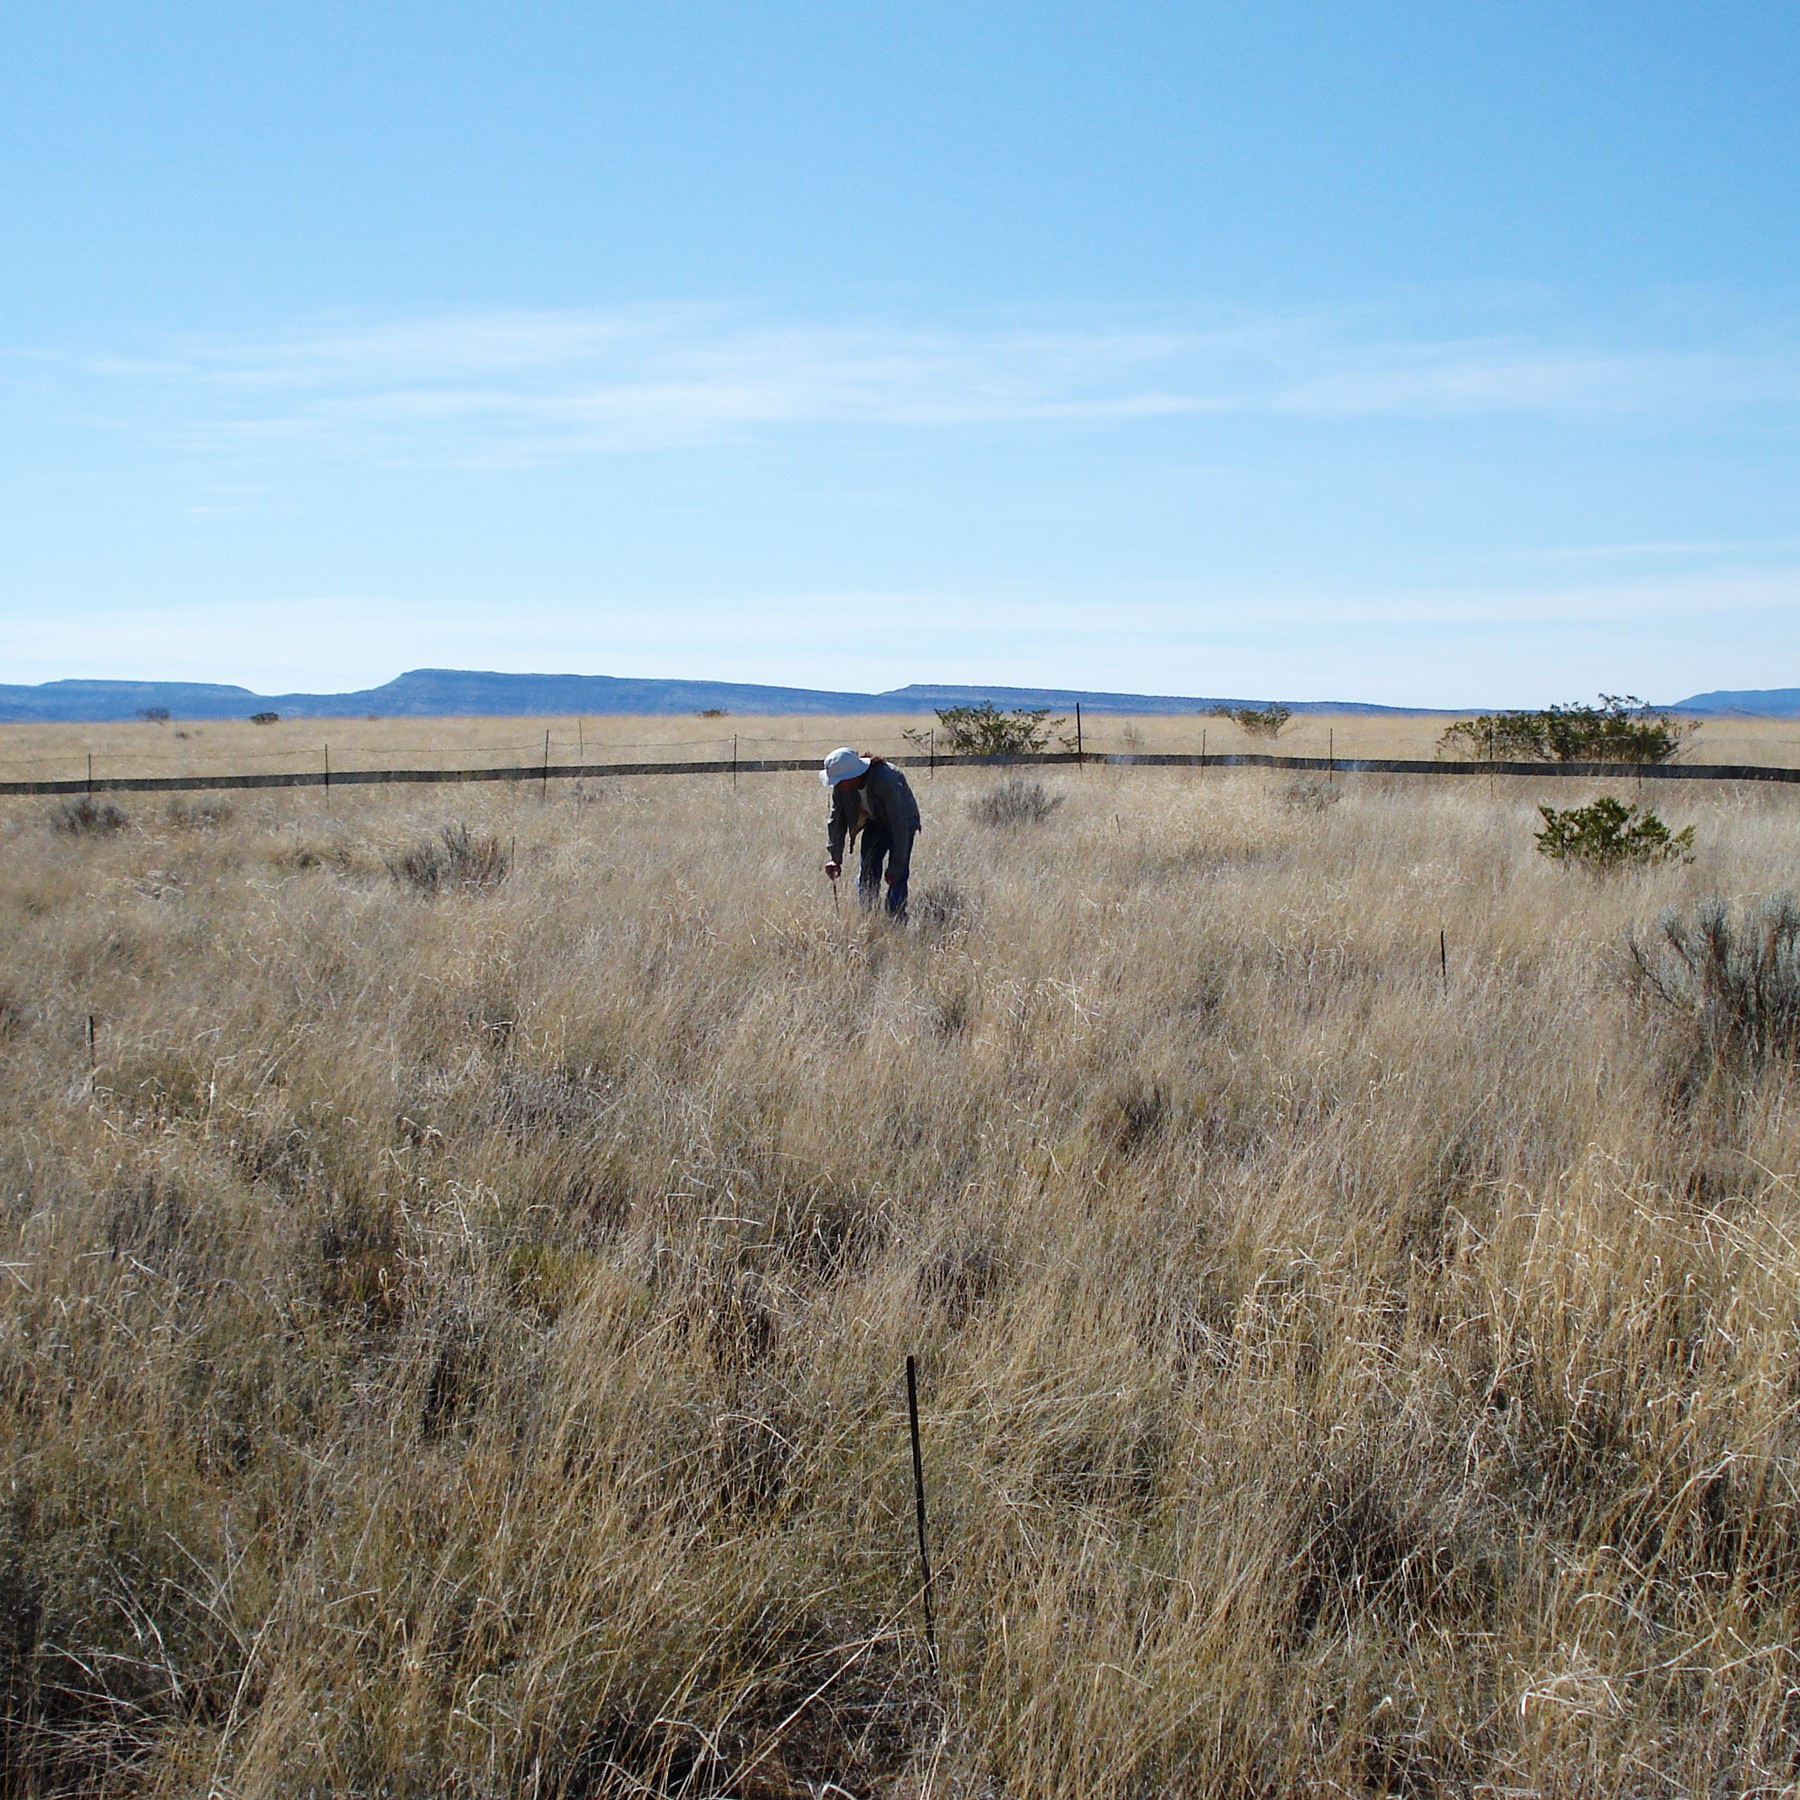 A researcher with a ruler takes measurements in the tall grass of a desert meadow.